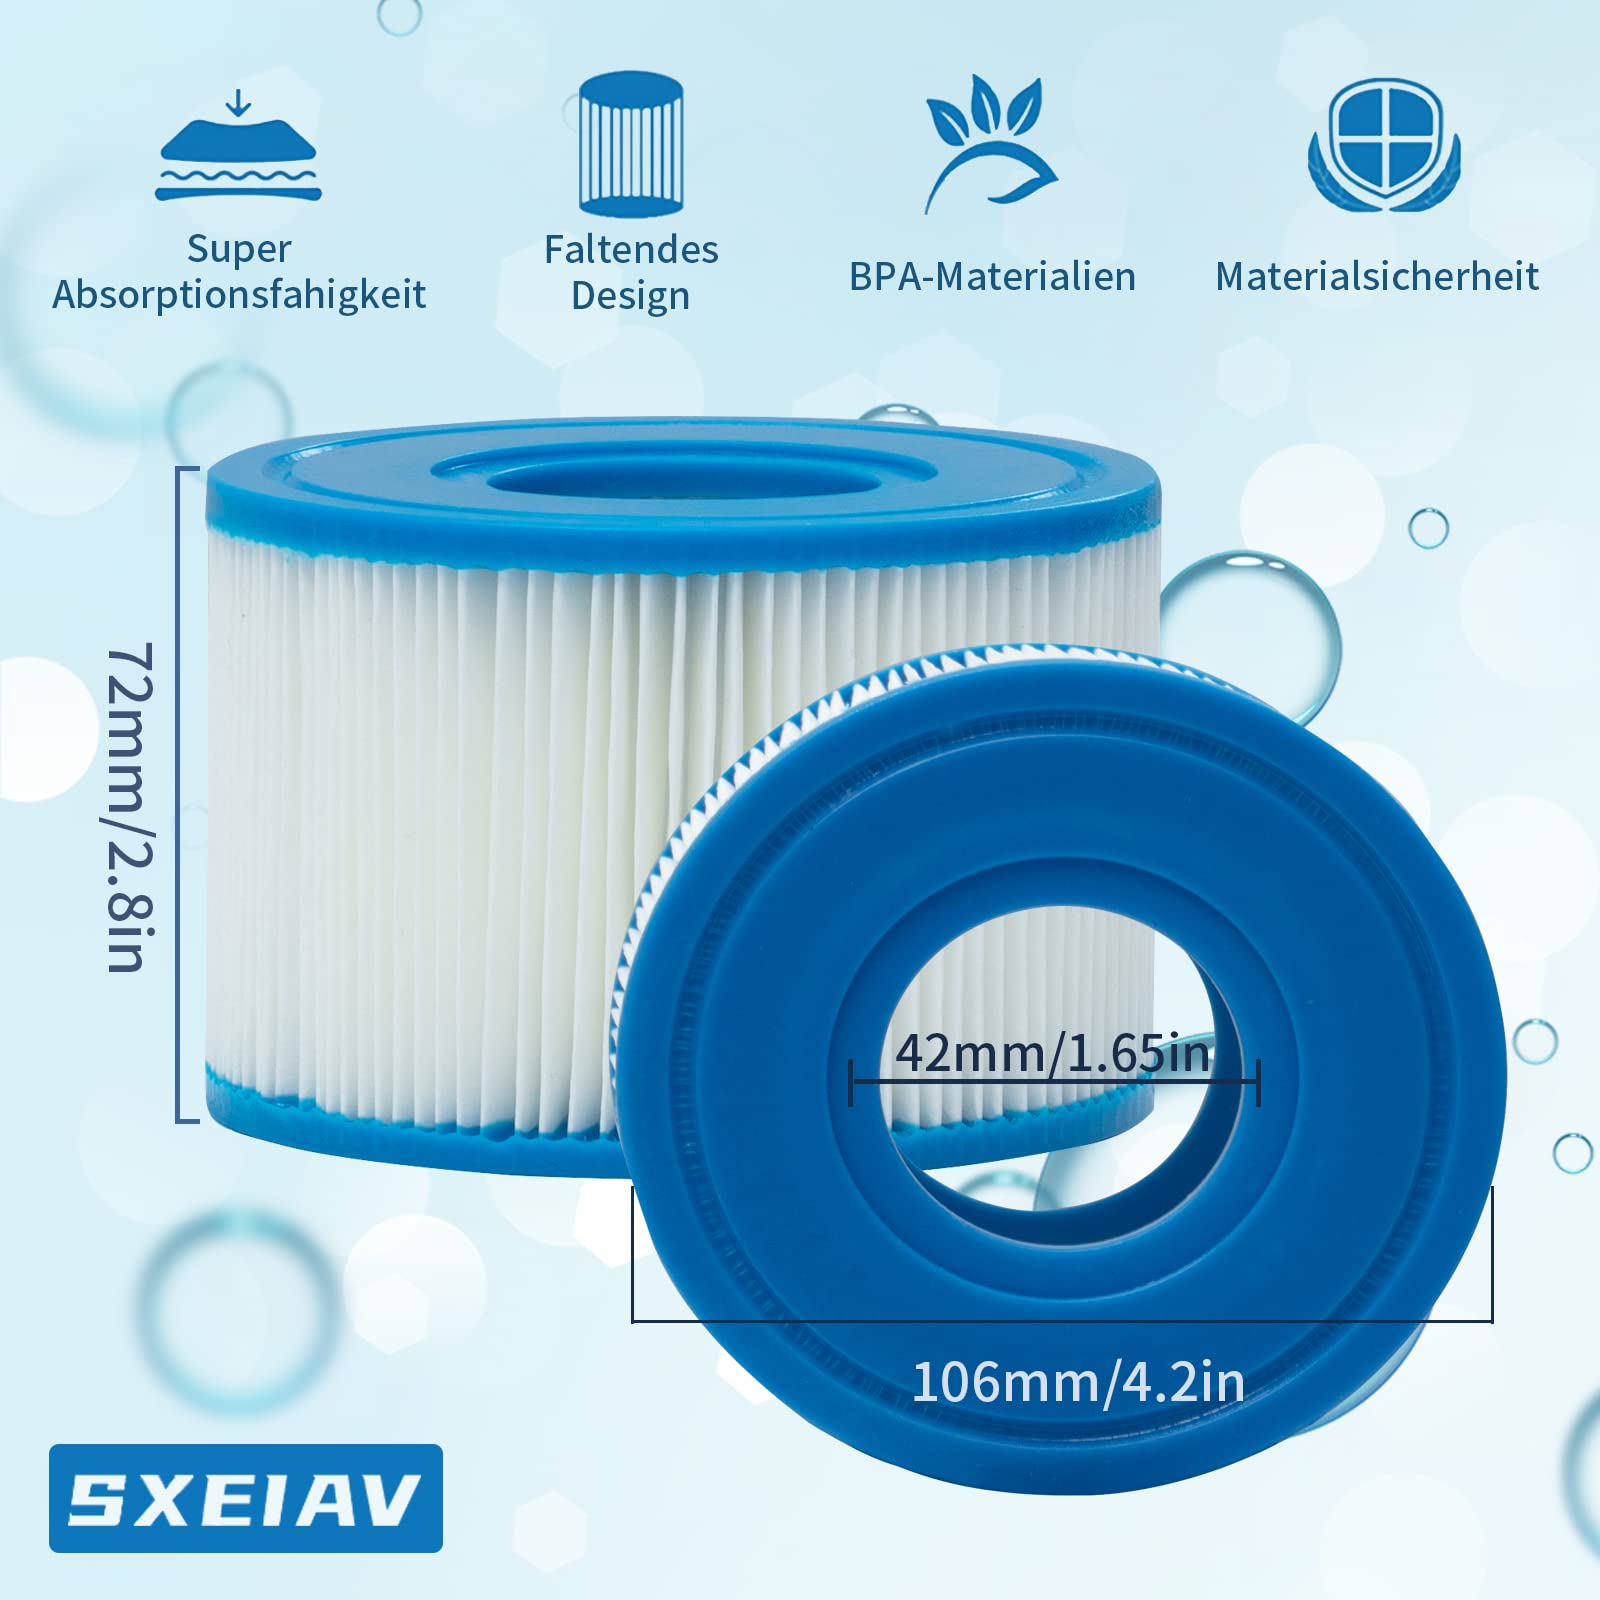 SXEIAV Type S1 Hot Tub Filters, Type S1 Spa Filter 29011E for All Intex PureSpa 28429E, Replacement for Intex 29001E Hot Tub Filter Cartridge, Easy Set Pool Spa Filter Cartridges (12 Pack)